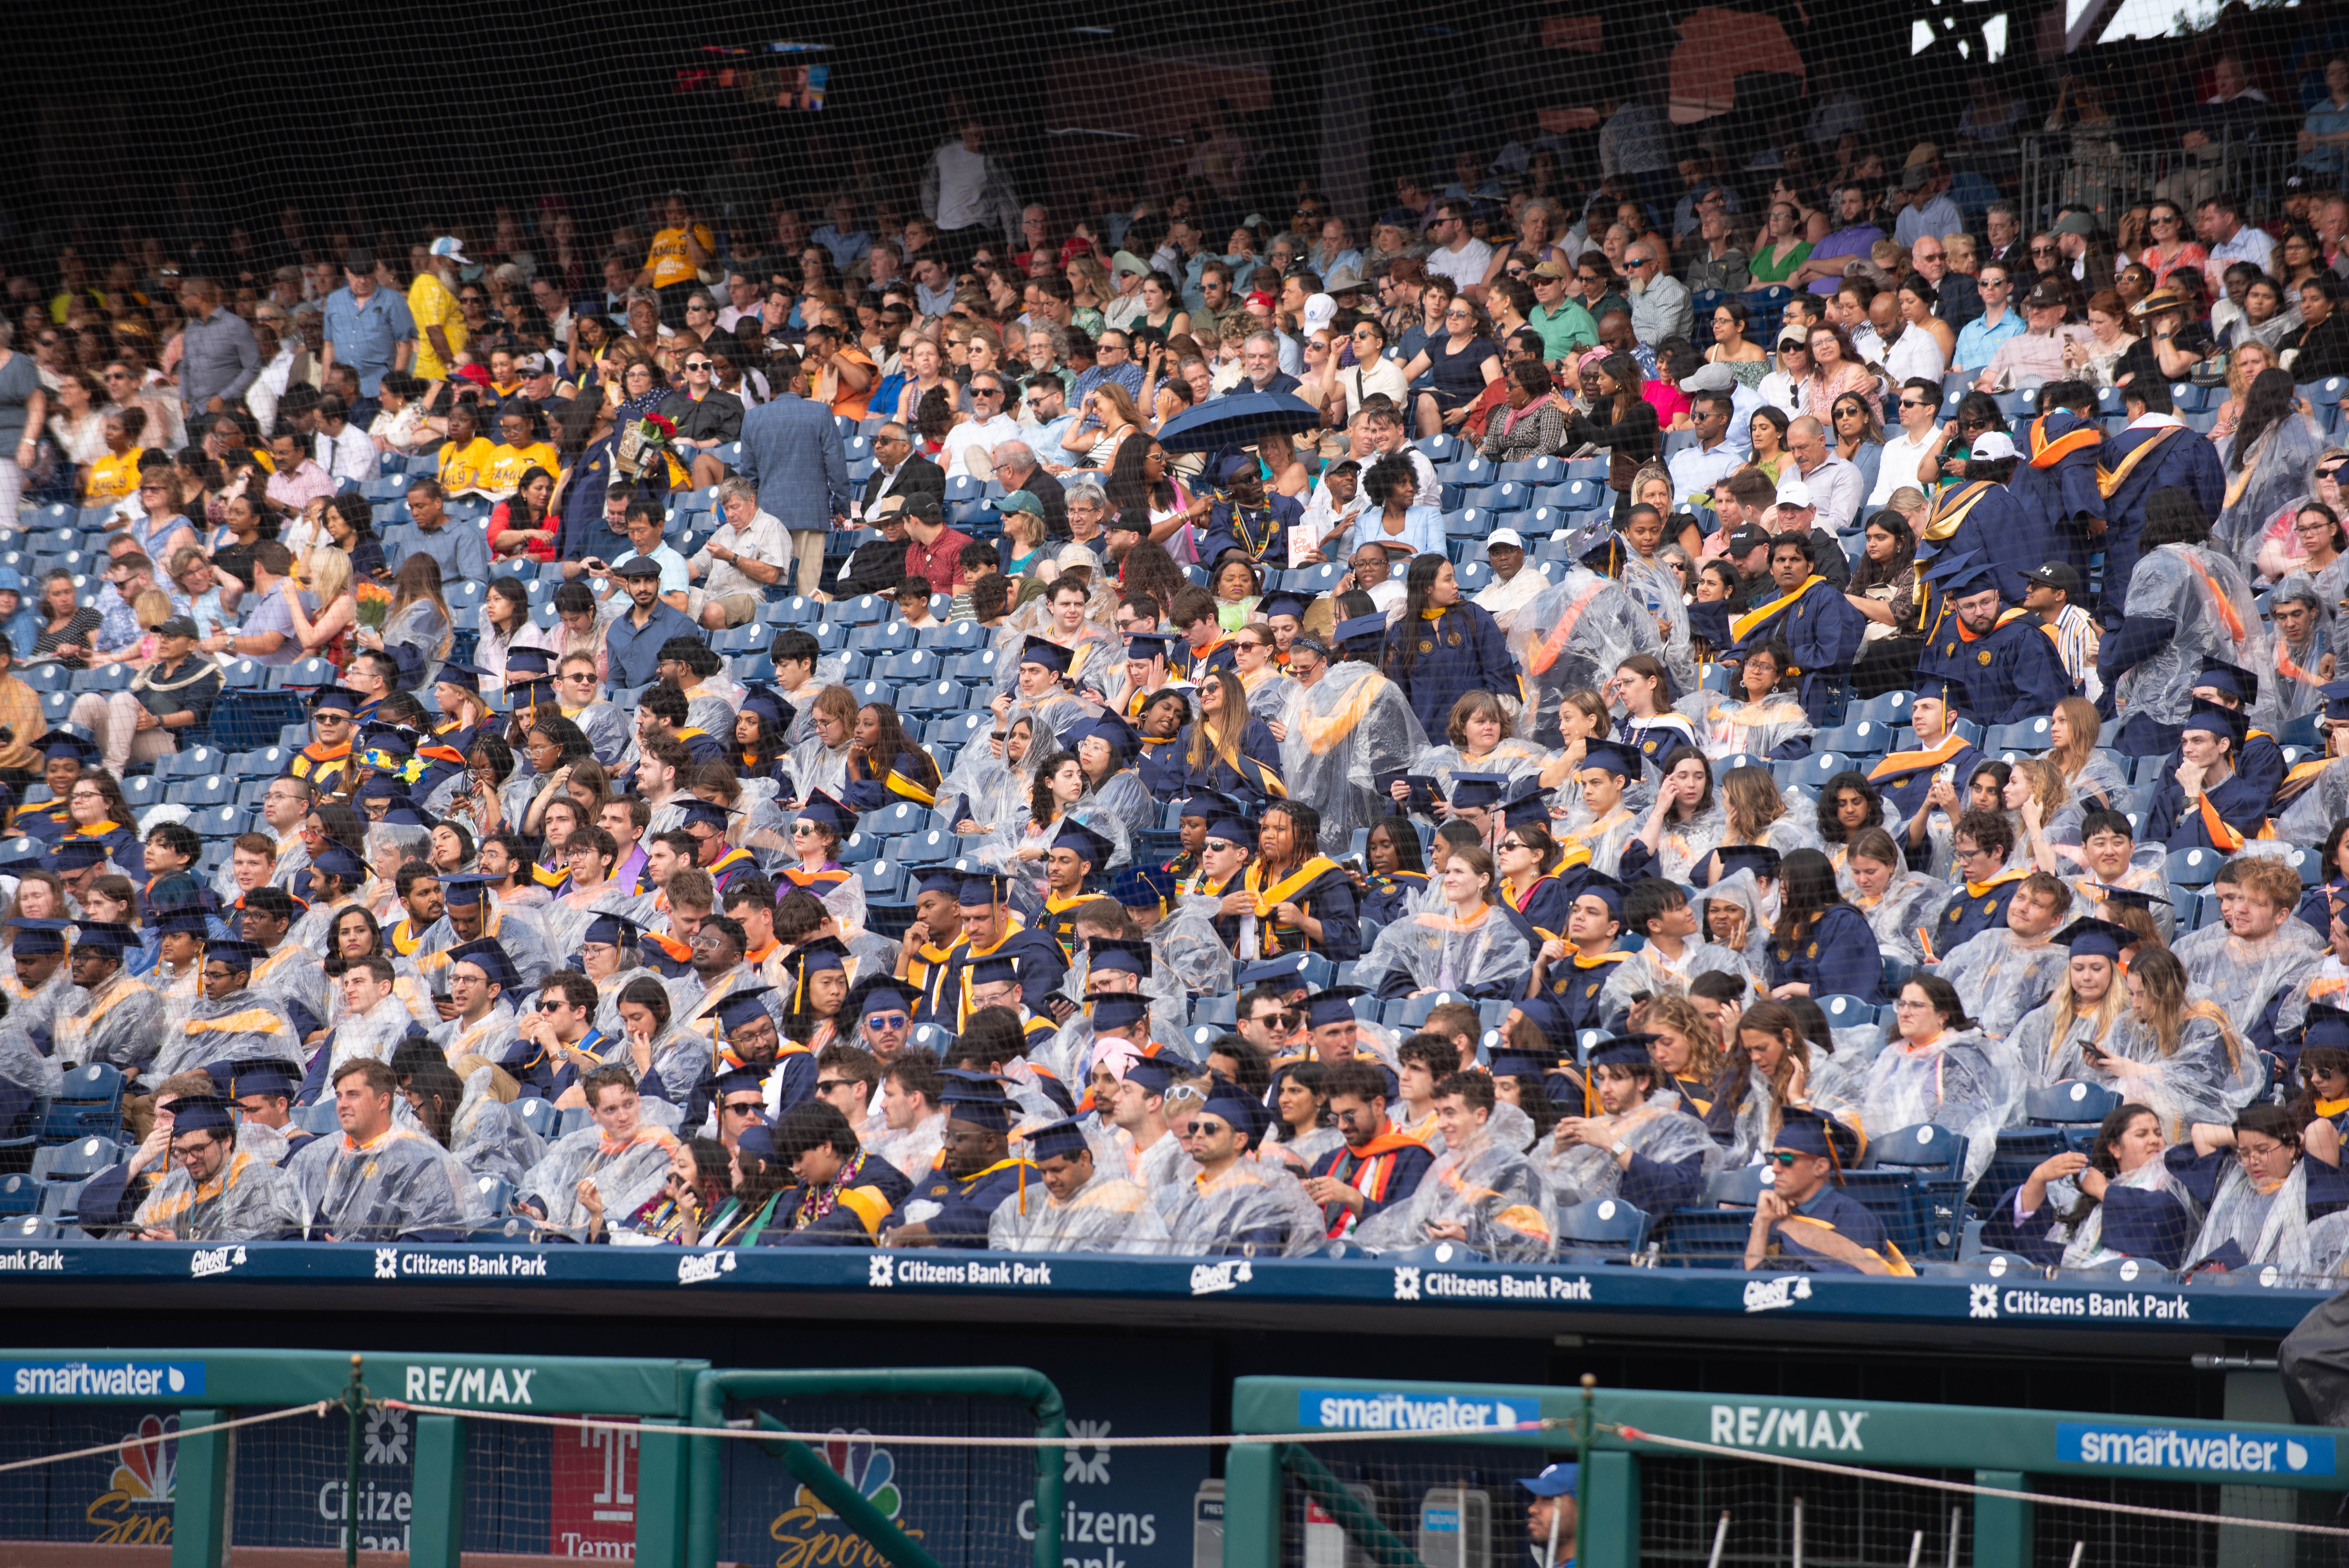 Students in Commencement regalia, some with ponchos and umbrellas, in the stands of Citizens Bank Park for Drexel's 2024 Commencement.